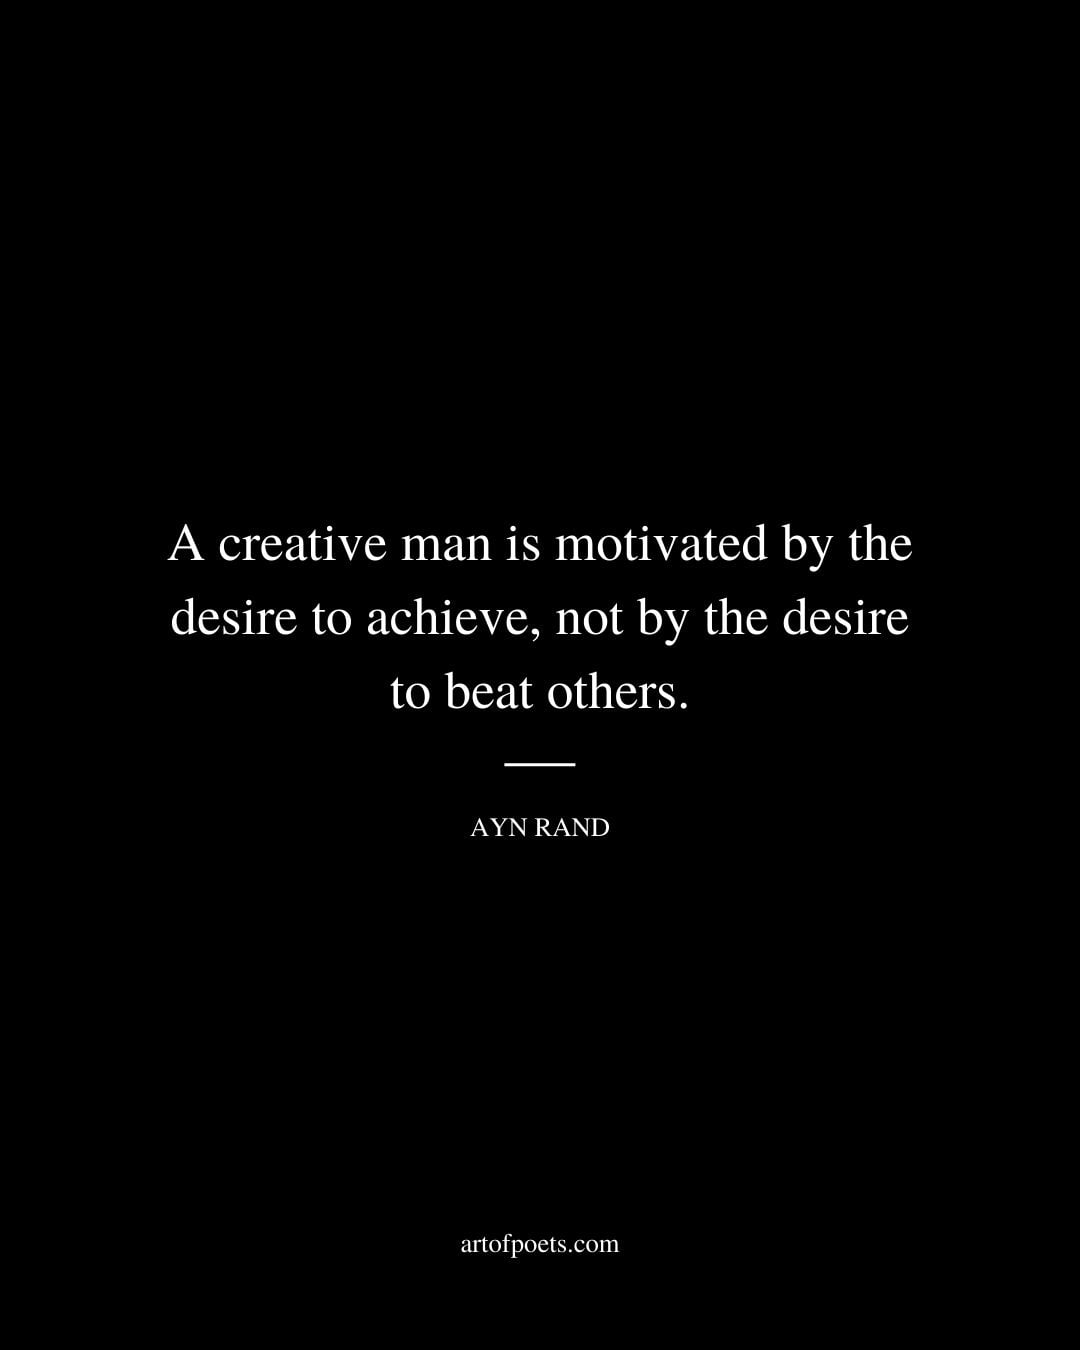 A creative man is motivated by the desire to achieve not by the desire to beat others